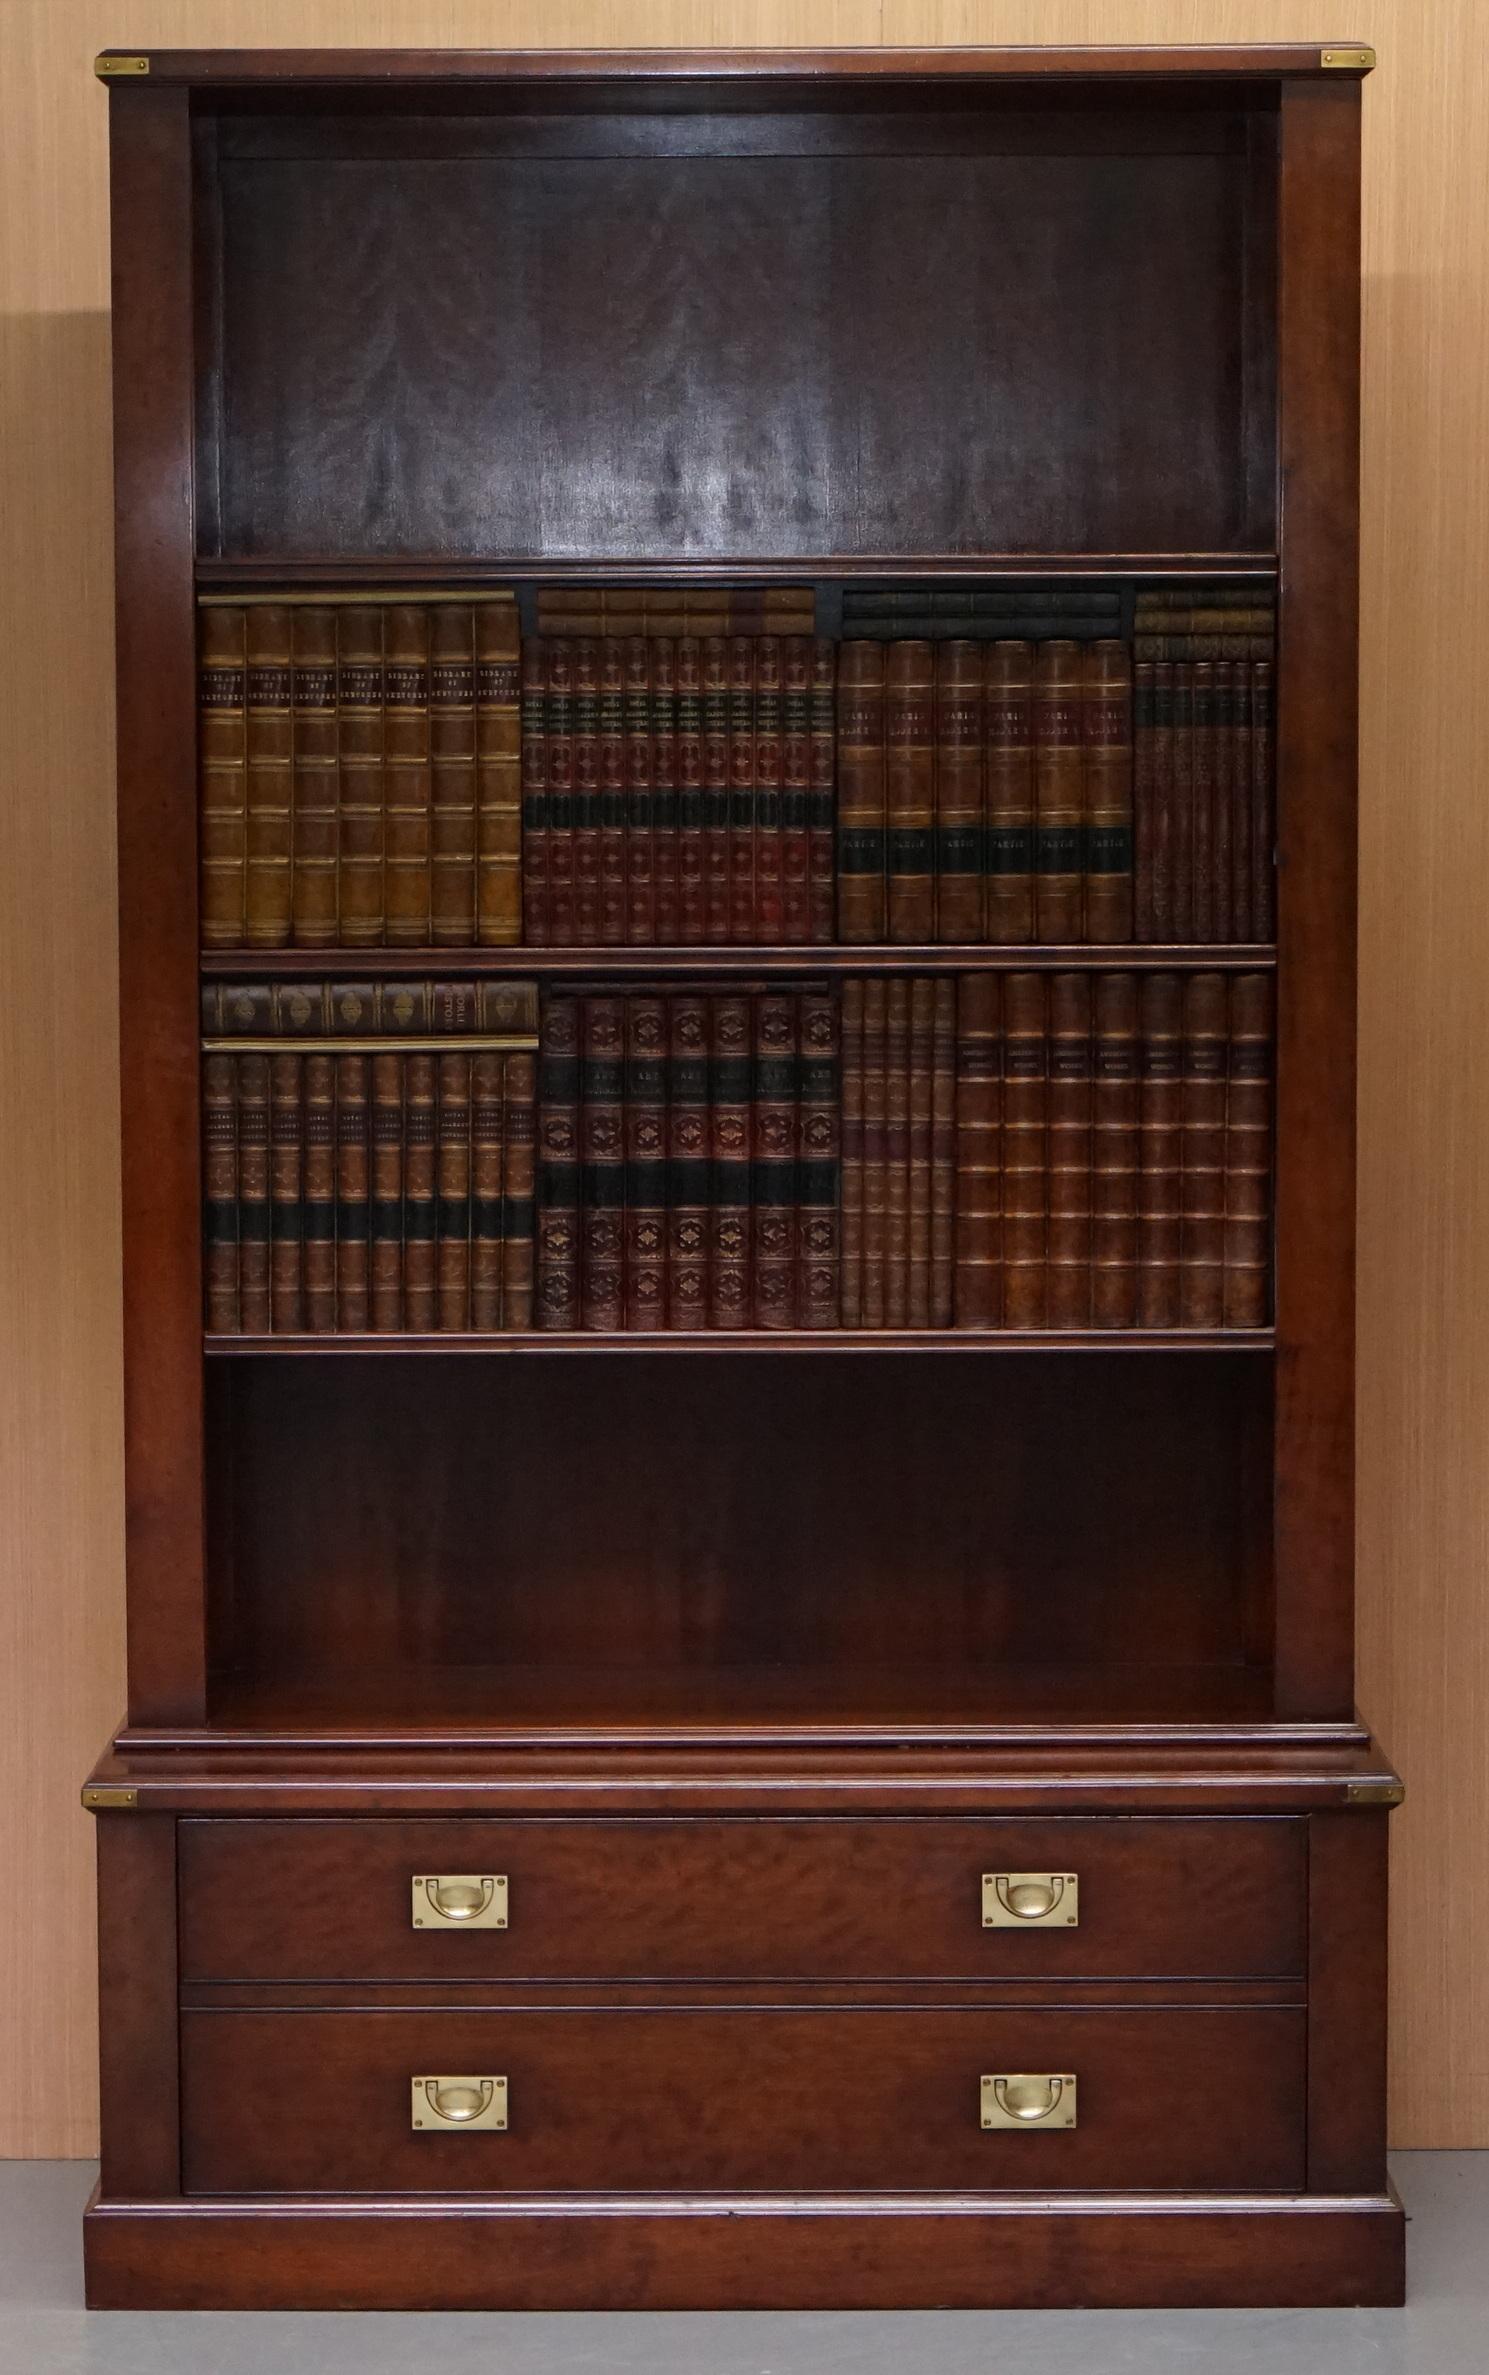 We are delighted to offer for sale this stunning custom made to order REH Kennedy furniture retailed through Harrods London bookcase TV cabinet with sliding faux books bookcase

This bookcase is amazing, the faux books split in the middle and